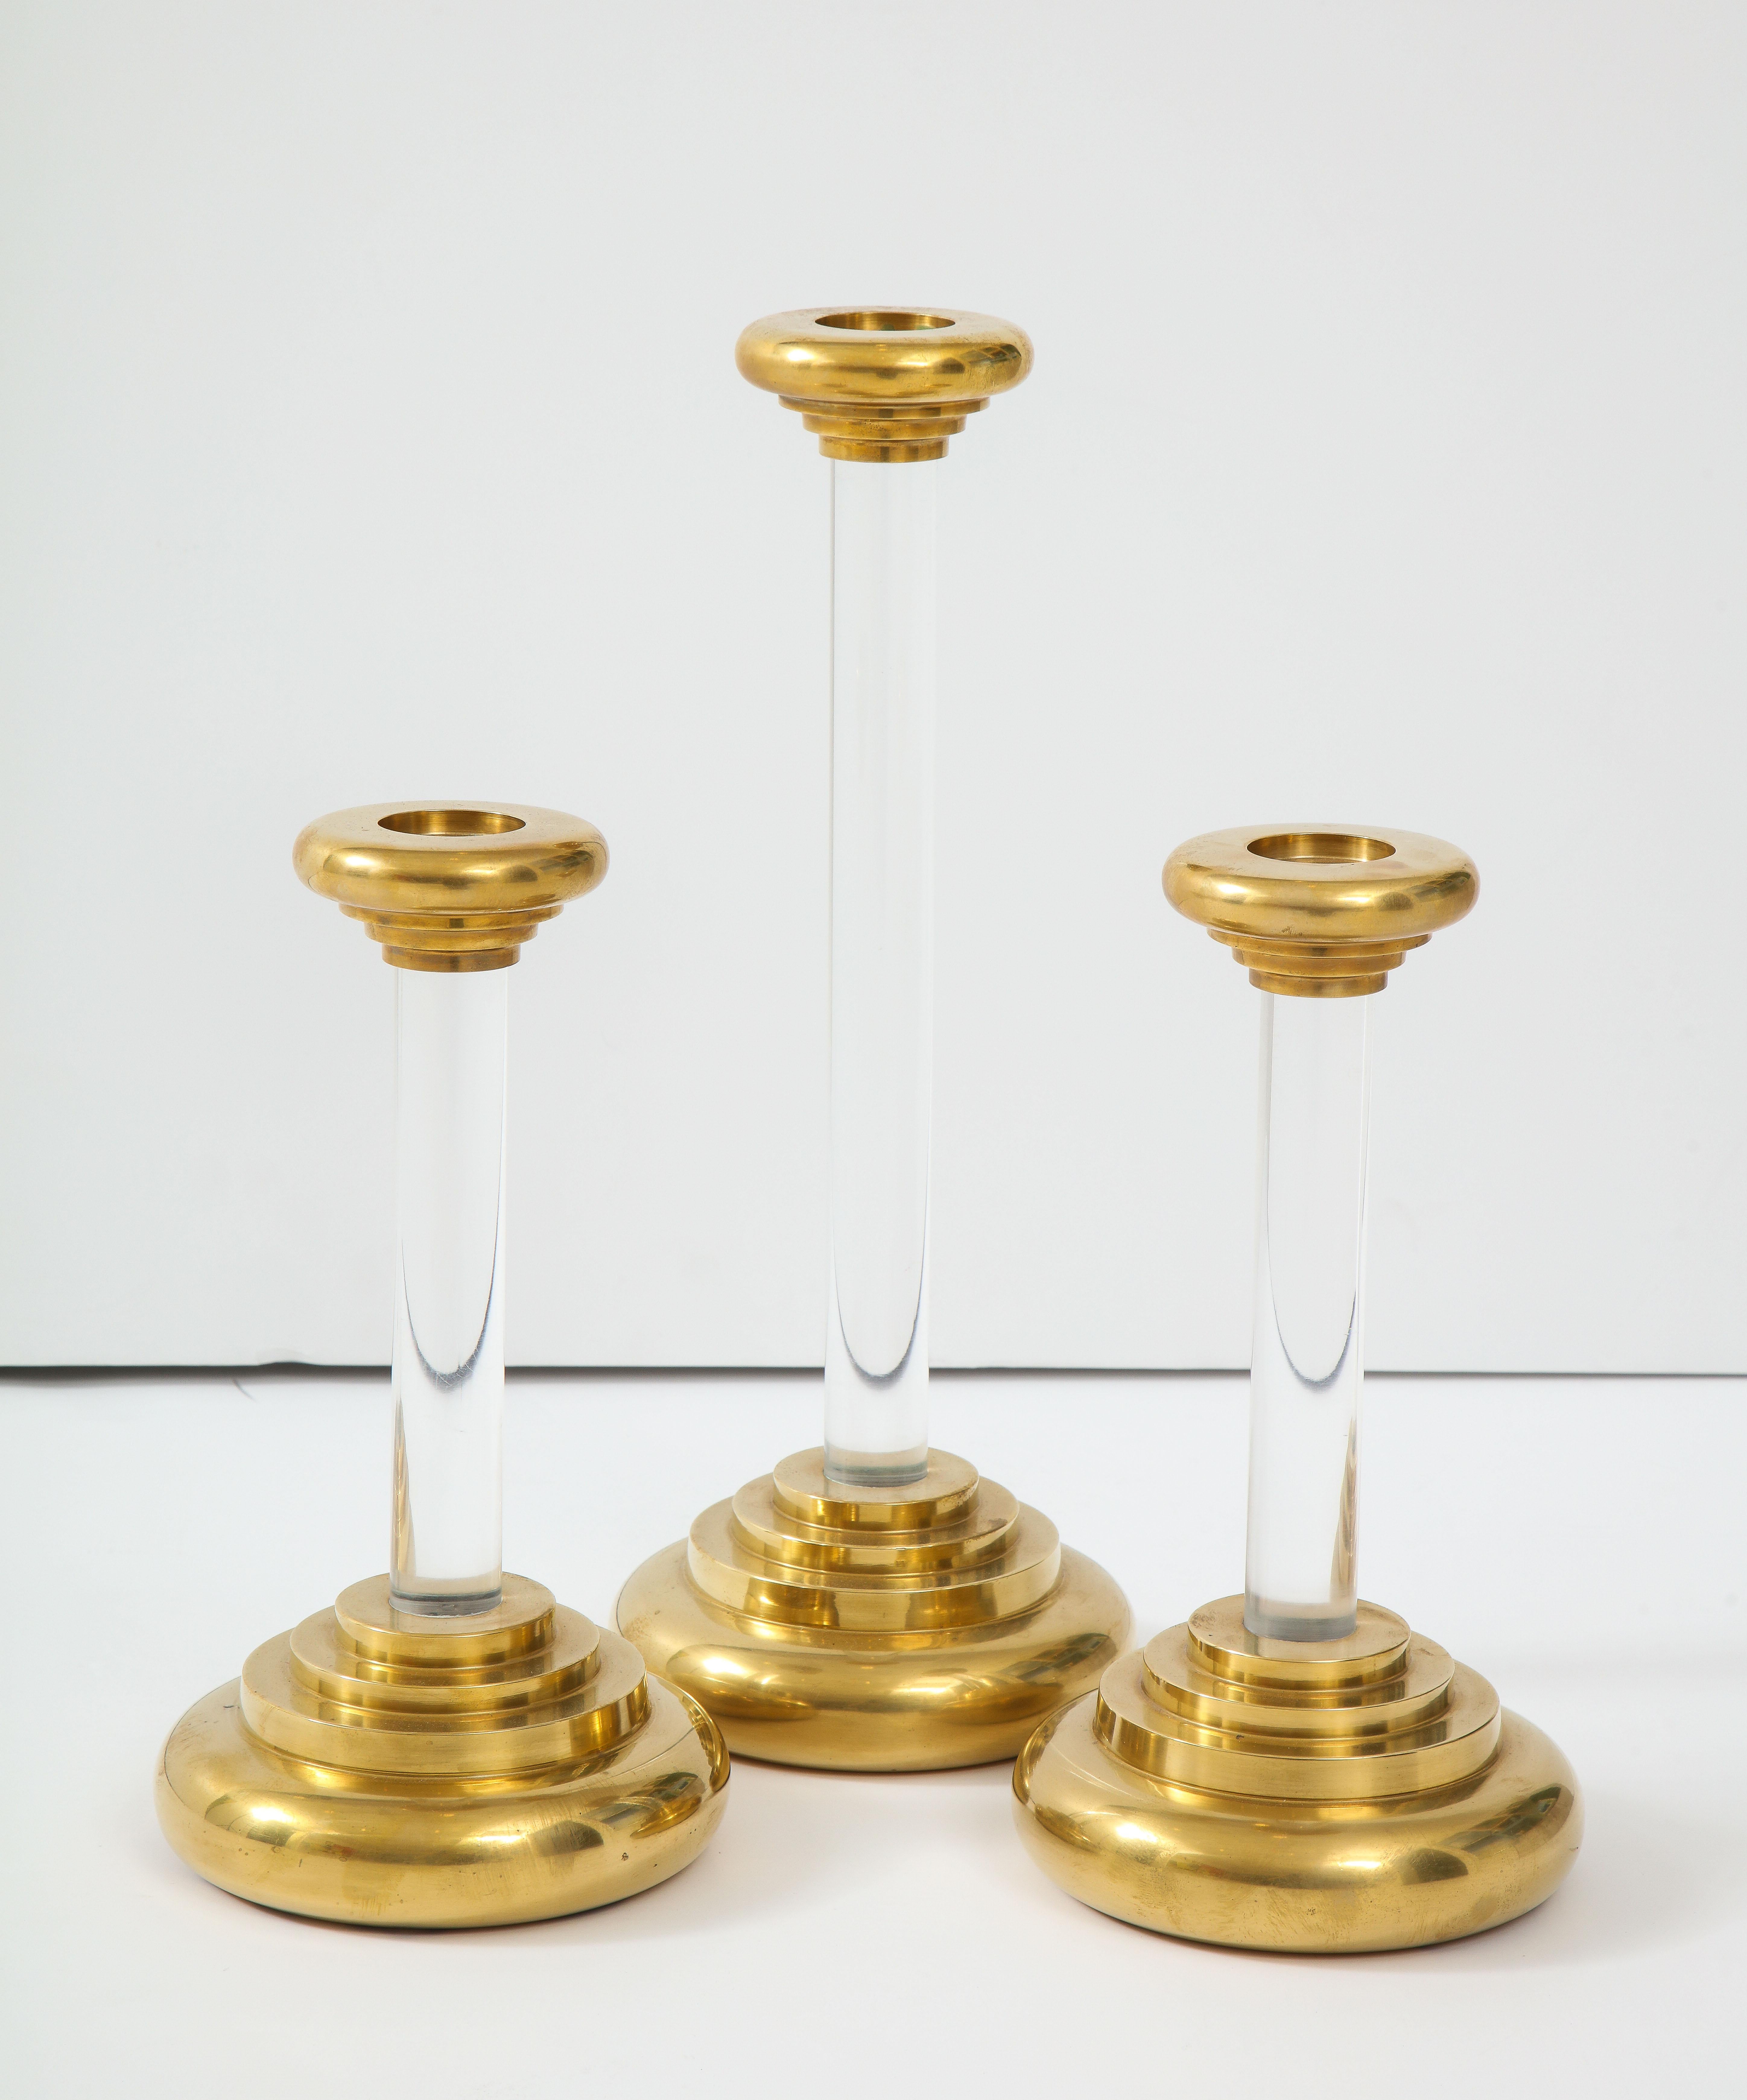 Large set of three 1980s modern Lucite and brass candleholders.

The two smaller candleholders height is 12